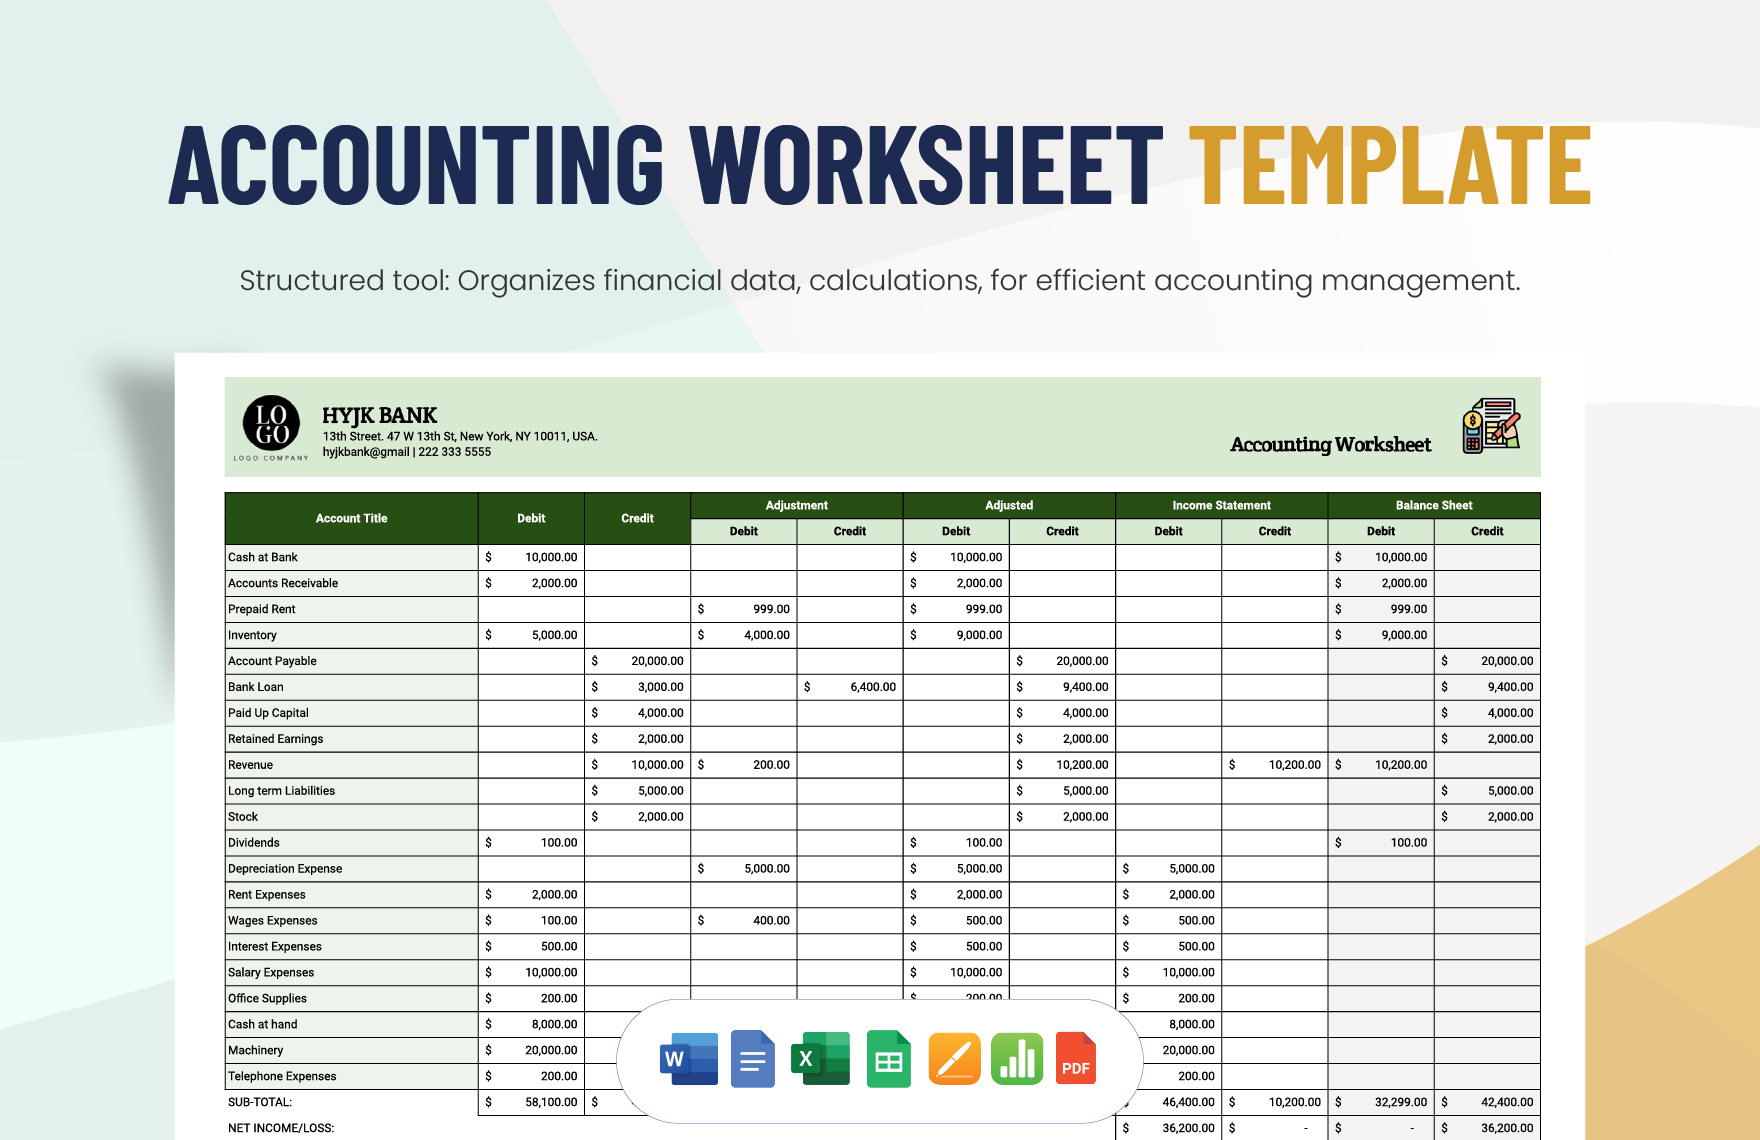 Accounting Worksheet Template in Word, Google Docs, Excel, PDF, Google Sheets, Apple Pages, Apple Numbers